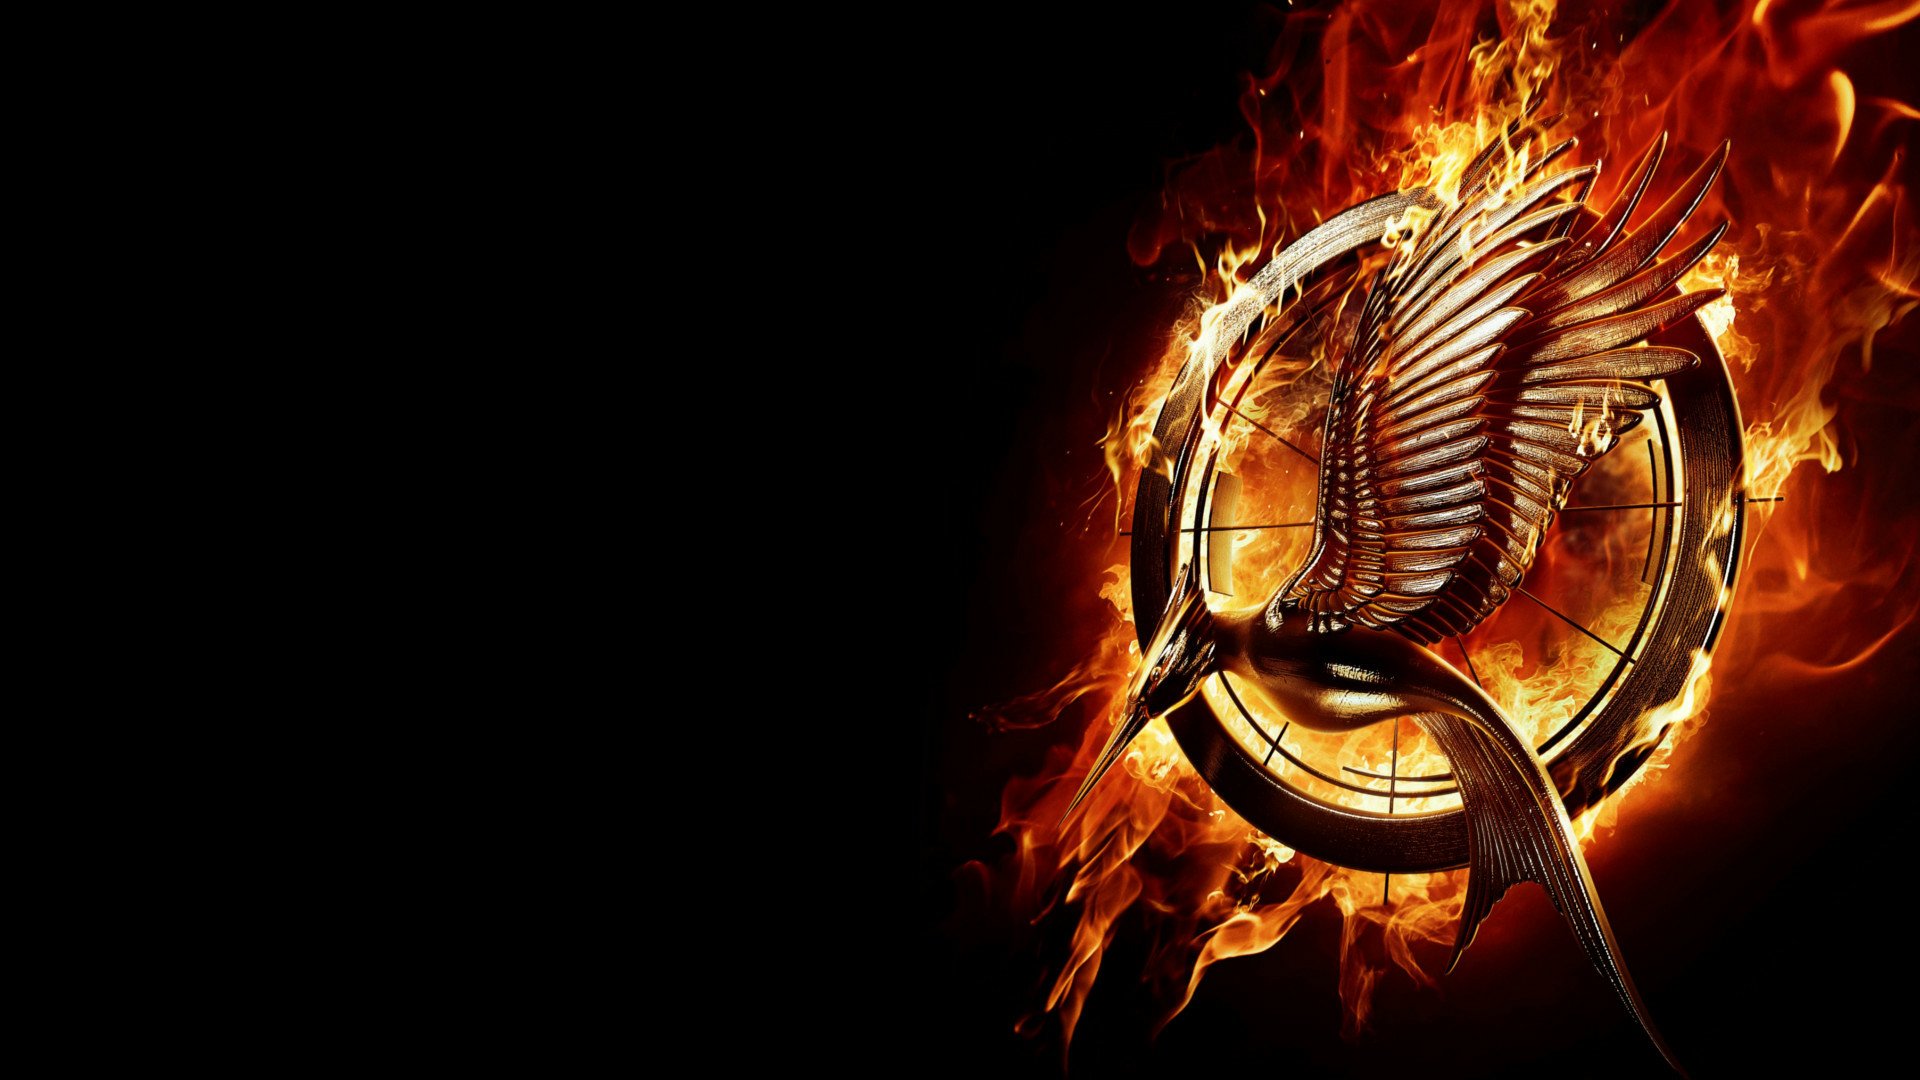 The Hunger Games: Catching Fire Phone Wallpaper - Mobile Abyss